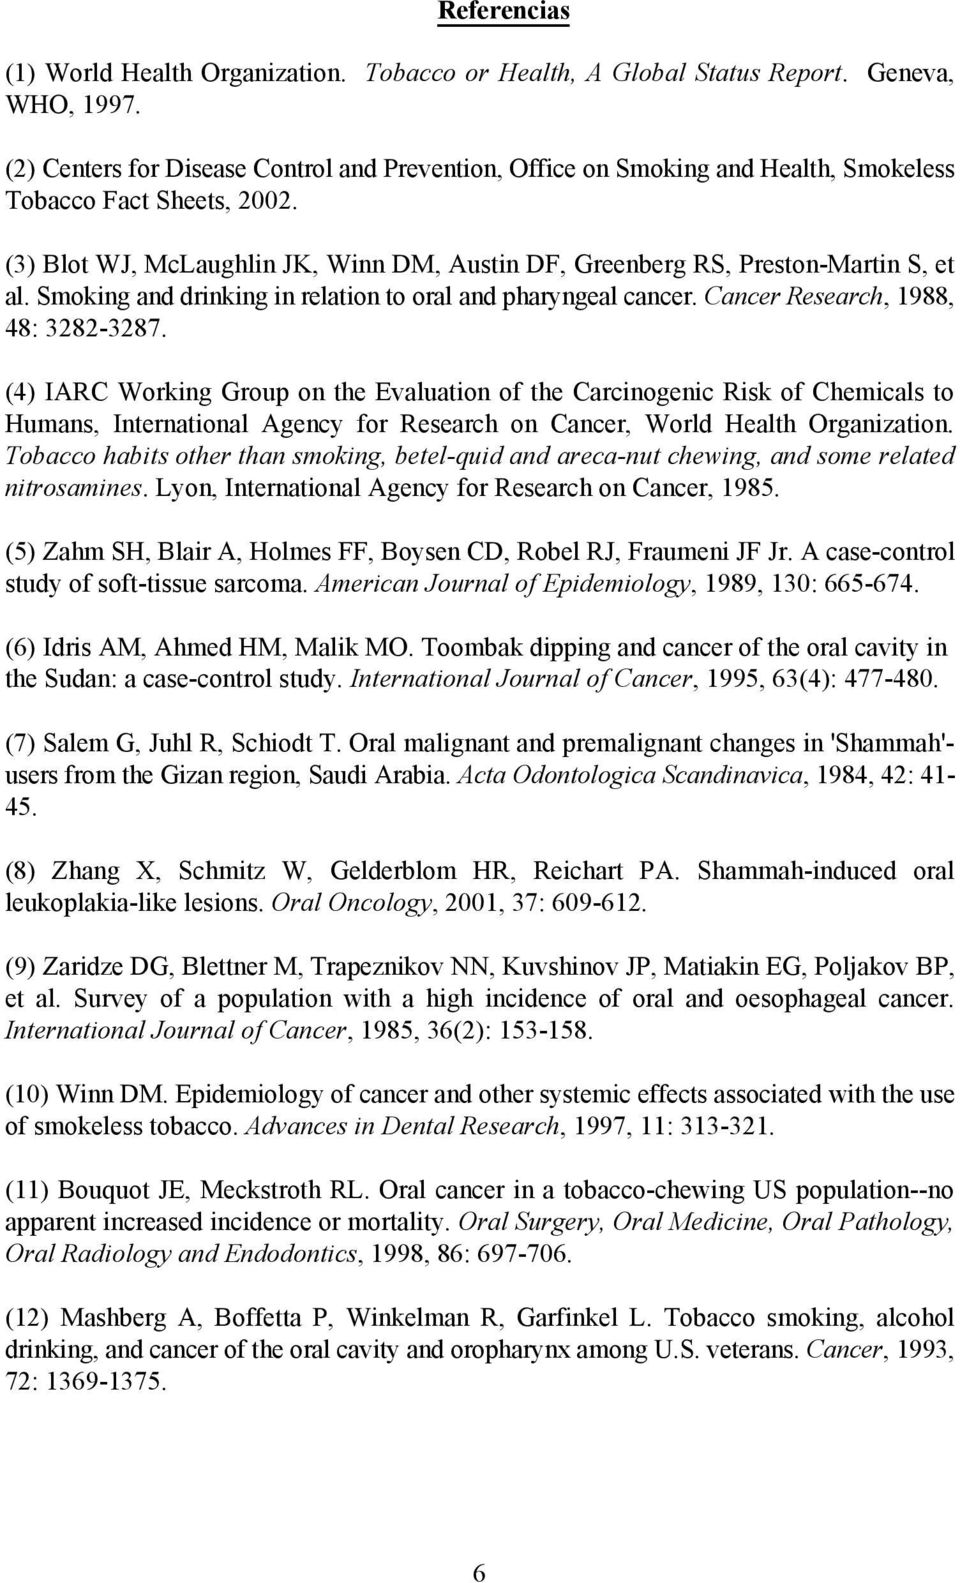 (3) Blot WJ, McLaughlin JK, Winn DM, Austin DF, Greenberg RS, Preston-Martin S, et al. Smoking and drinking in relation to oral and pharyngeal cancer. Cancer Research, 1988, 48: 3282-3287.